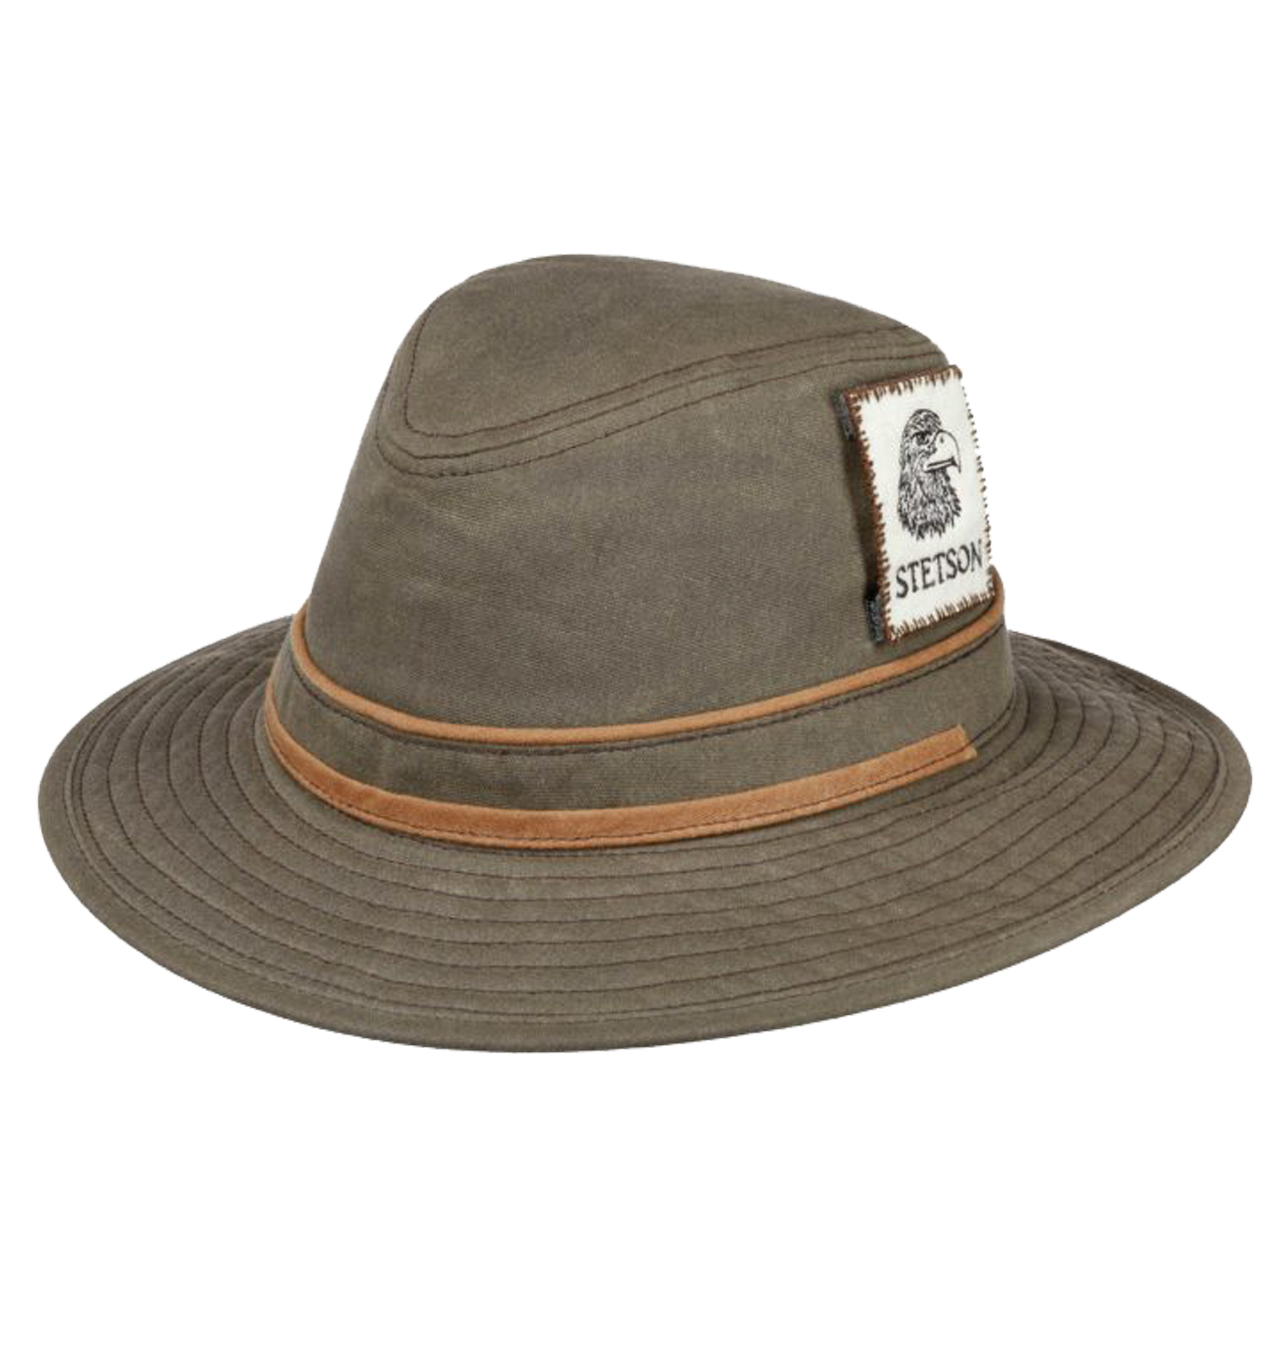 Stetson - Outdoors Eagle Vintage Waxed Traveller Hat - Olive